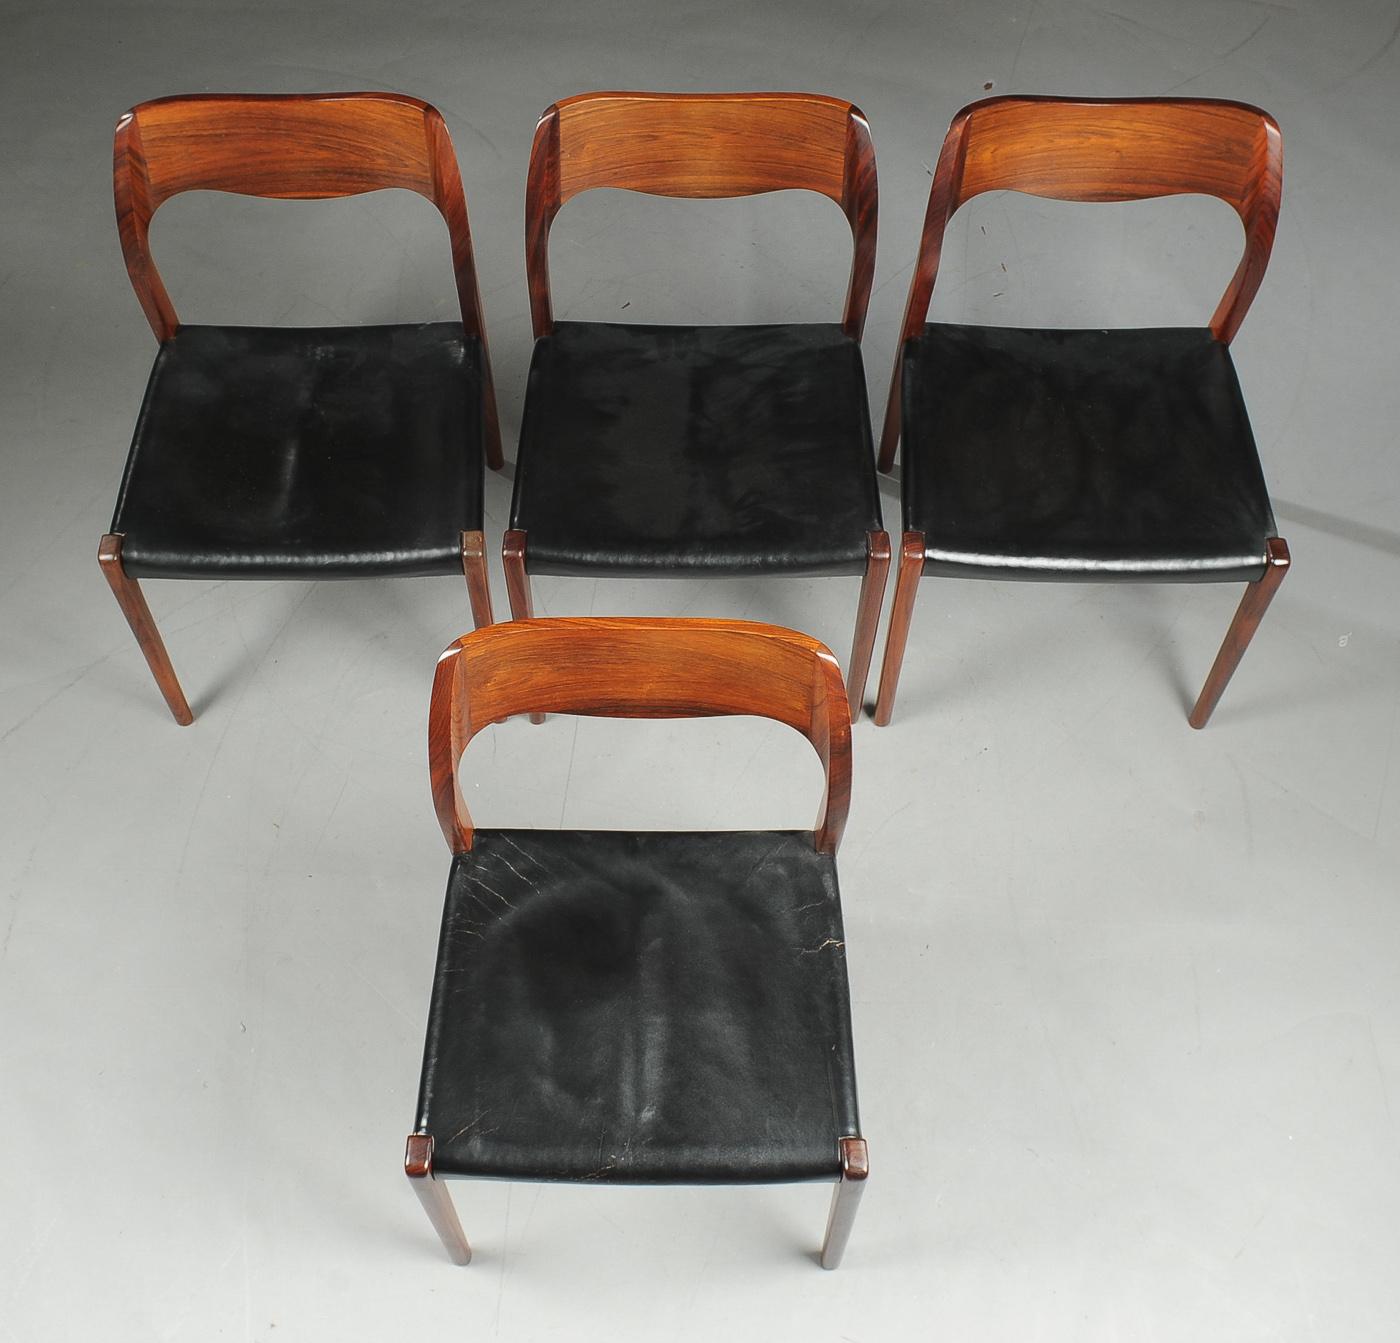 Scandinavian Modern Niels Otto Moller 1951 Dining Chairs in Original Black Leather For Sale